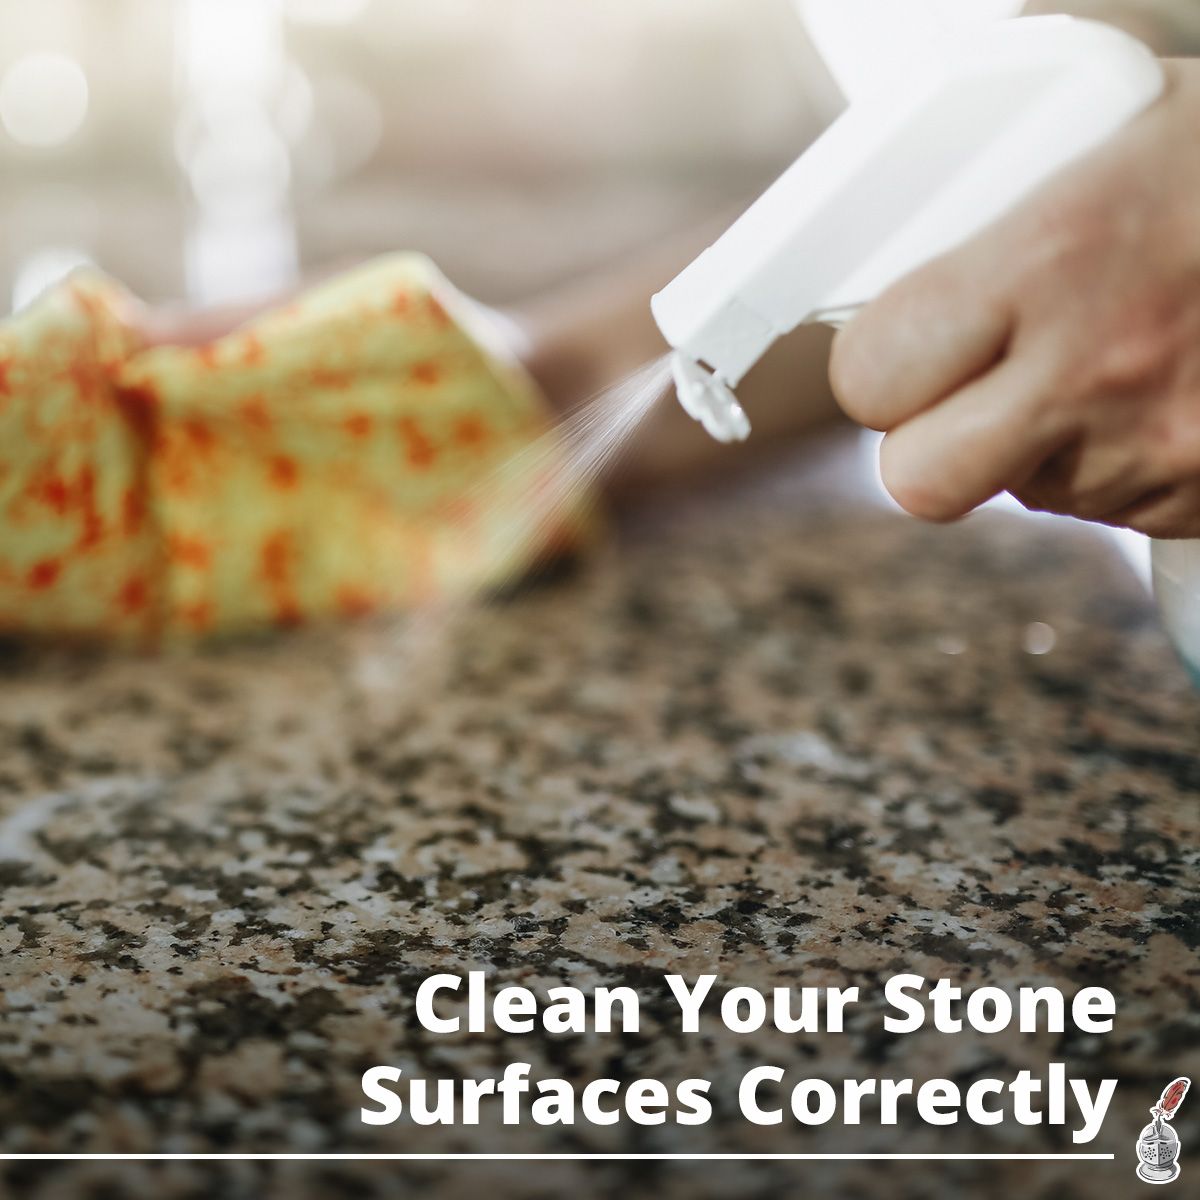 Clean Your Stone Surfaces Correctly